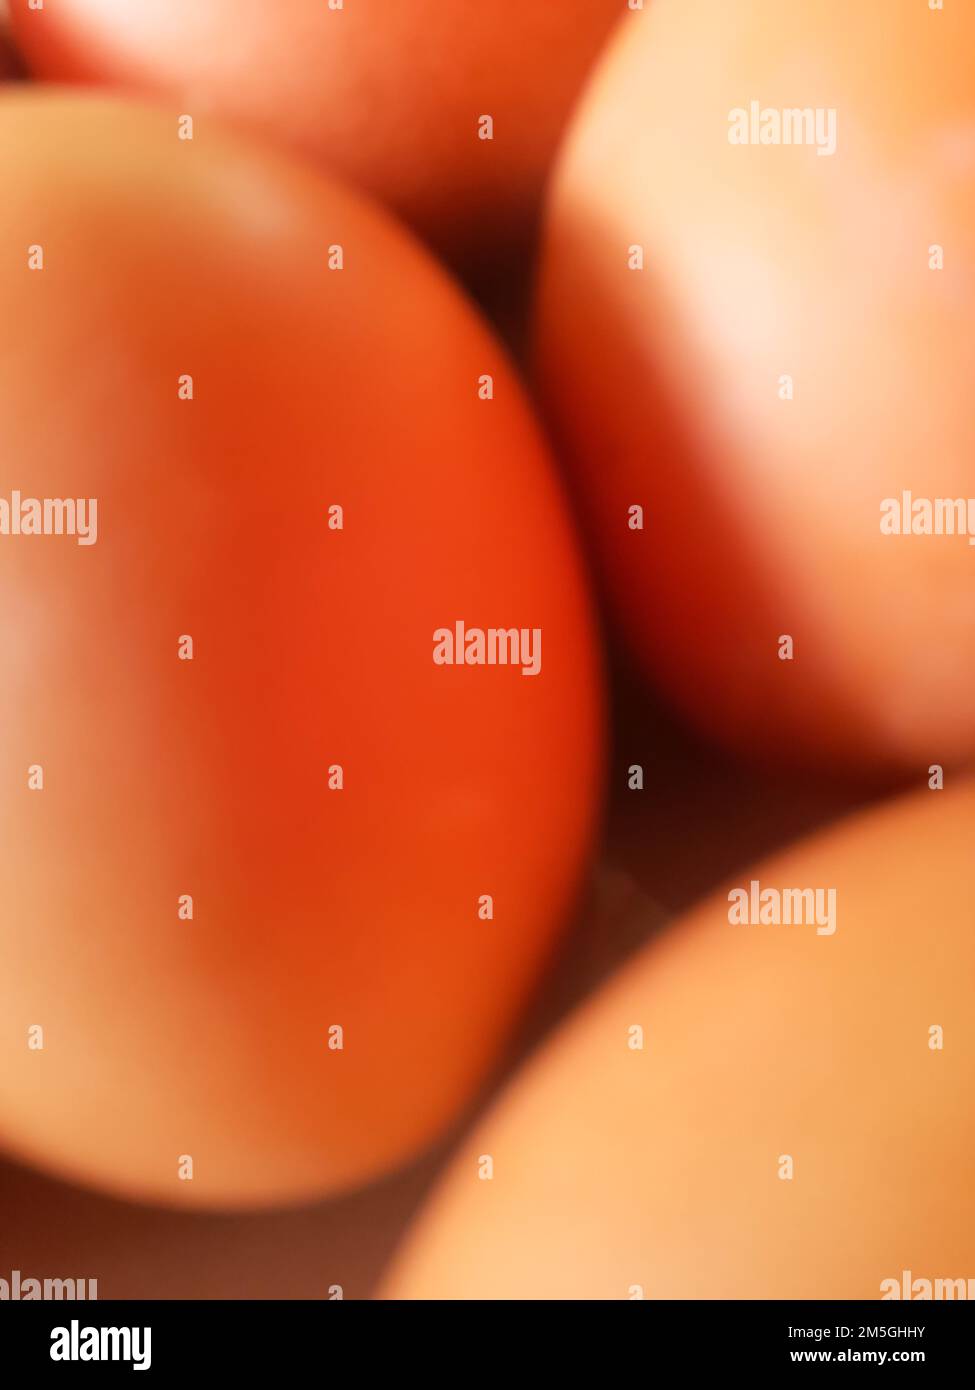 Blur photo or defocused abstract background of eggs on the plate Stock Photo